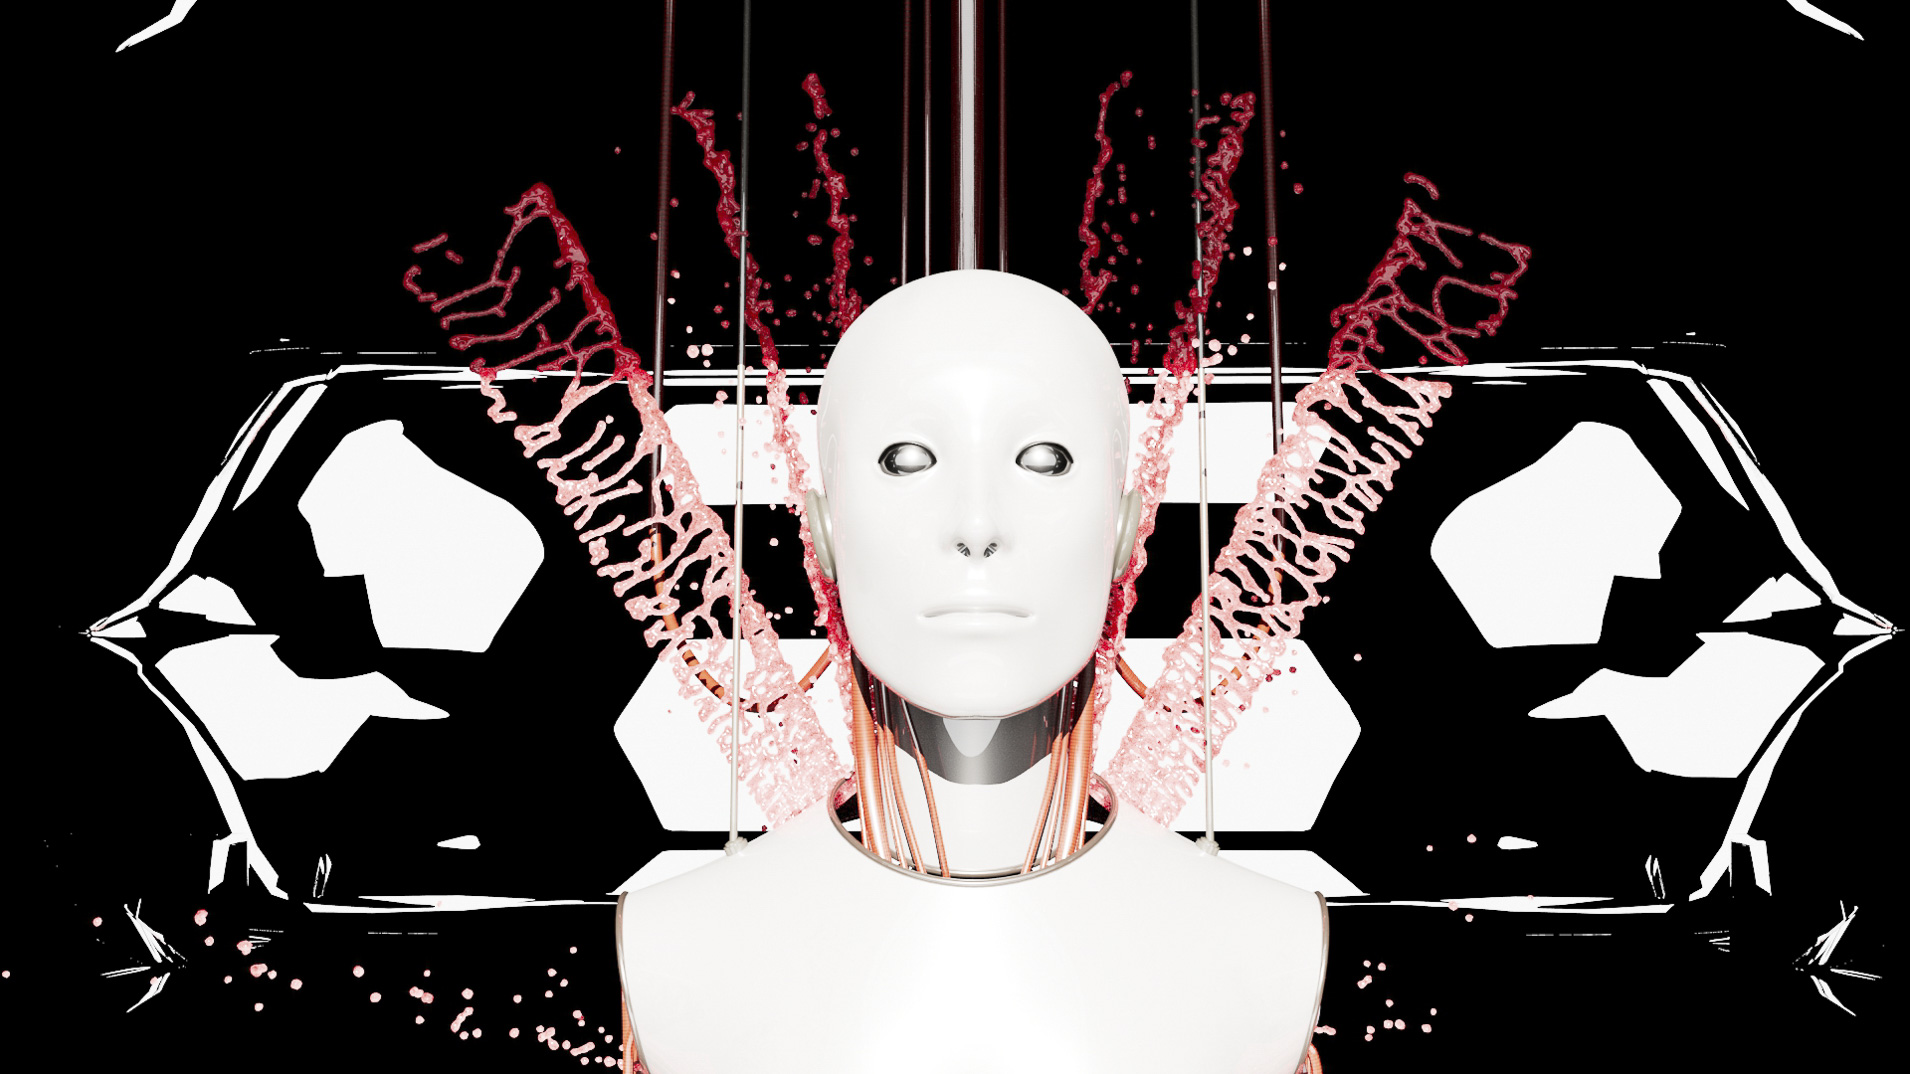 Still from a digital animation showing a figure in white with red protrusions